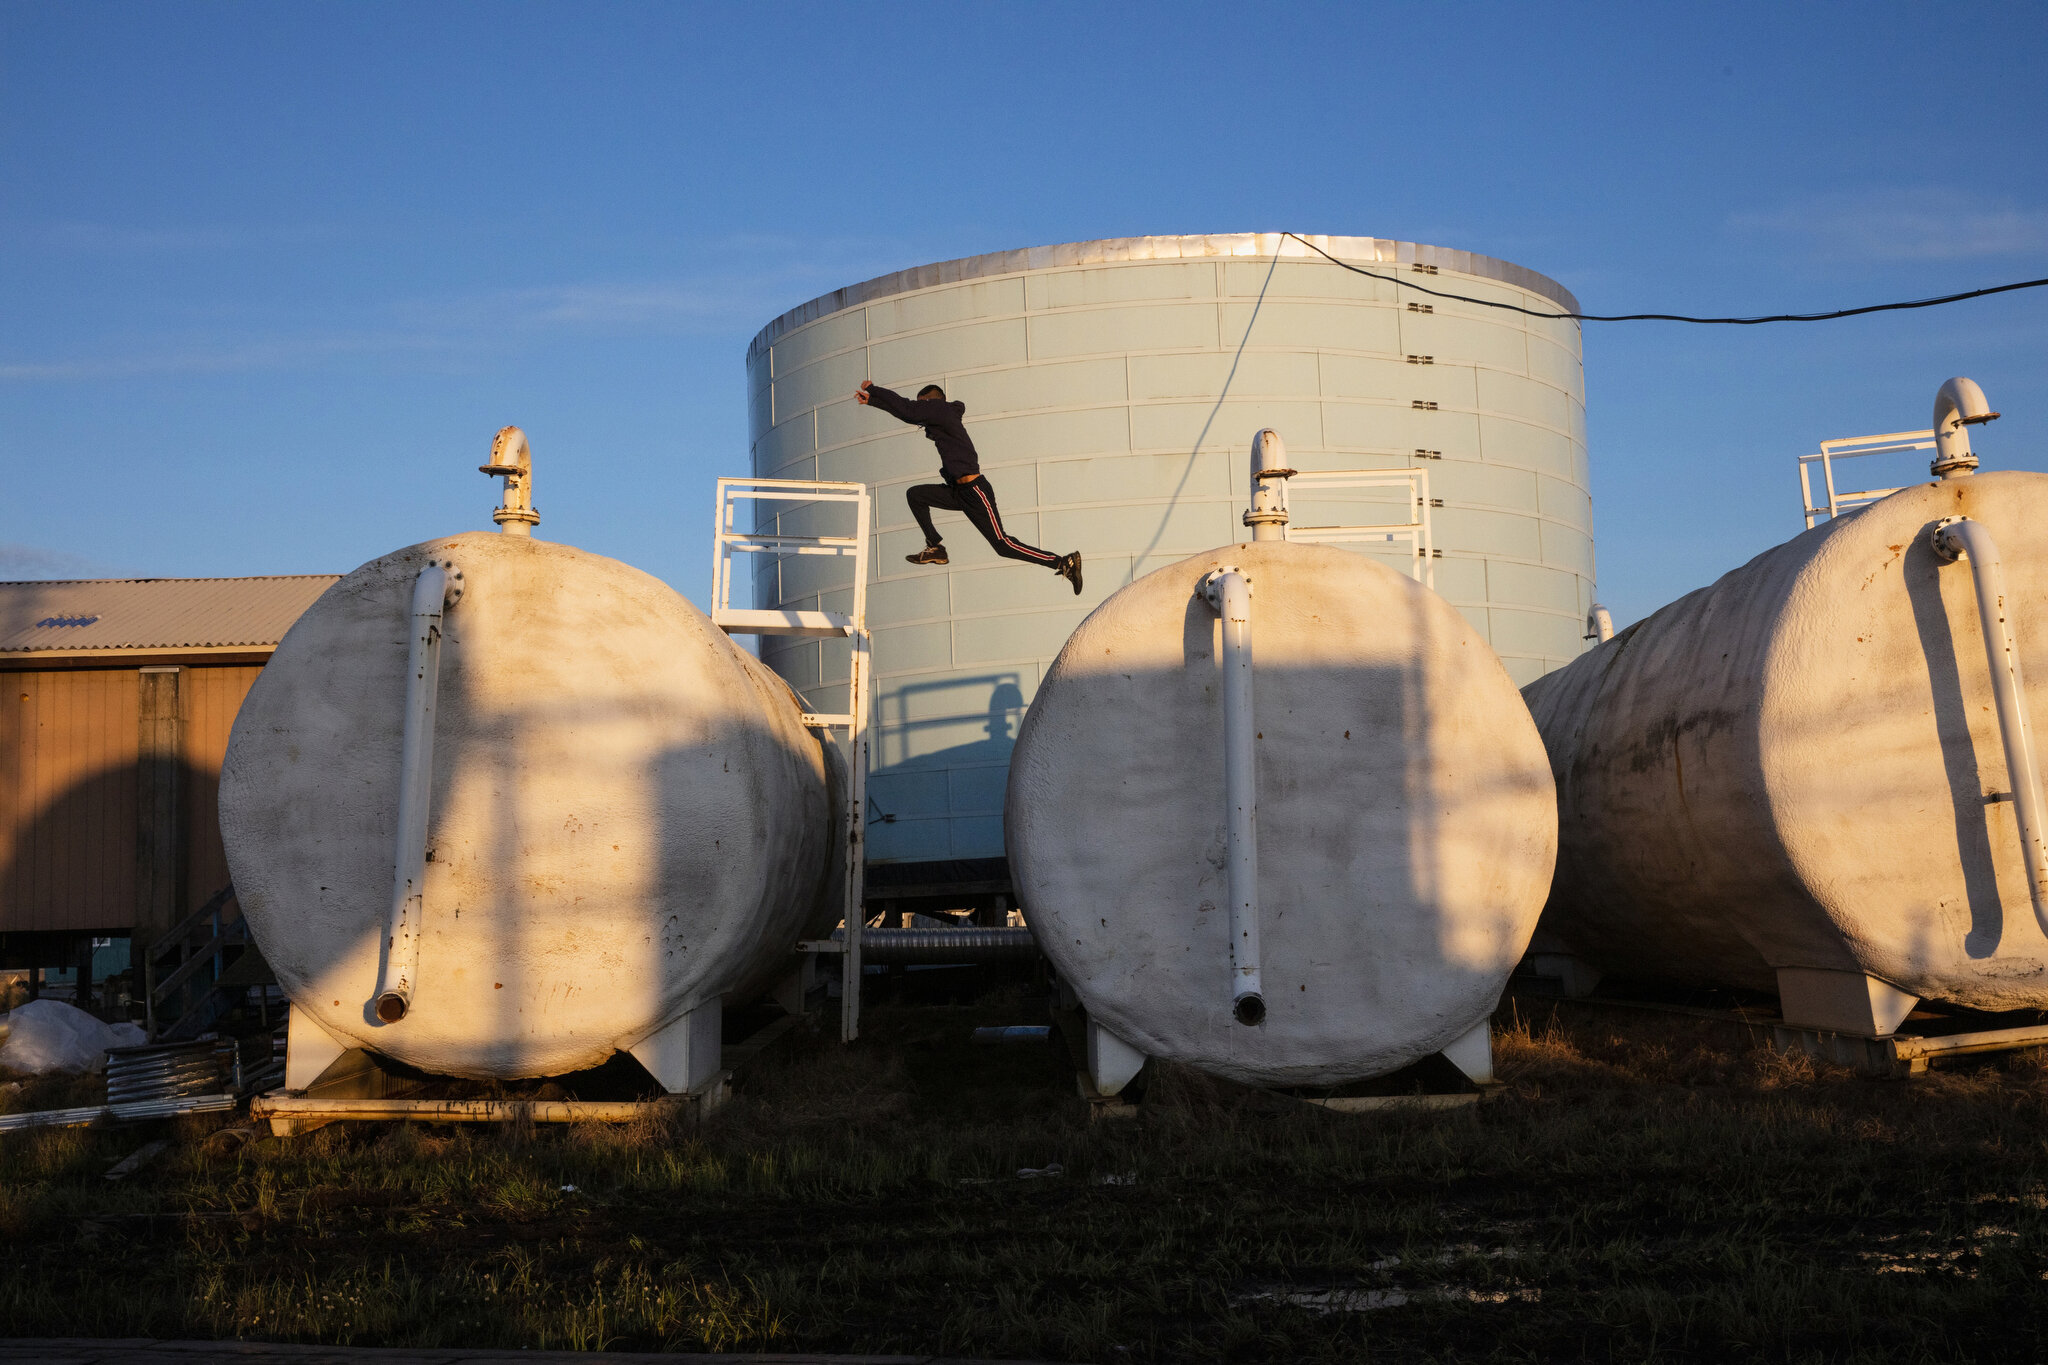  Children play on top of Newtok, Alaska's aging water treatment facilities. May 27th, 2019. Homes in Newtok do not have running water, plumbing or flush toilets; residents must gather their own water from this facility. However after 20 years of floo